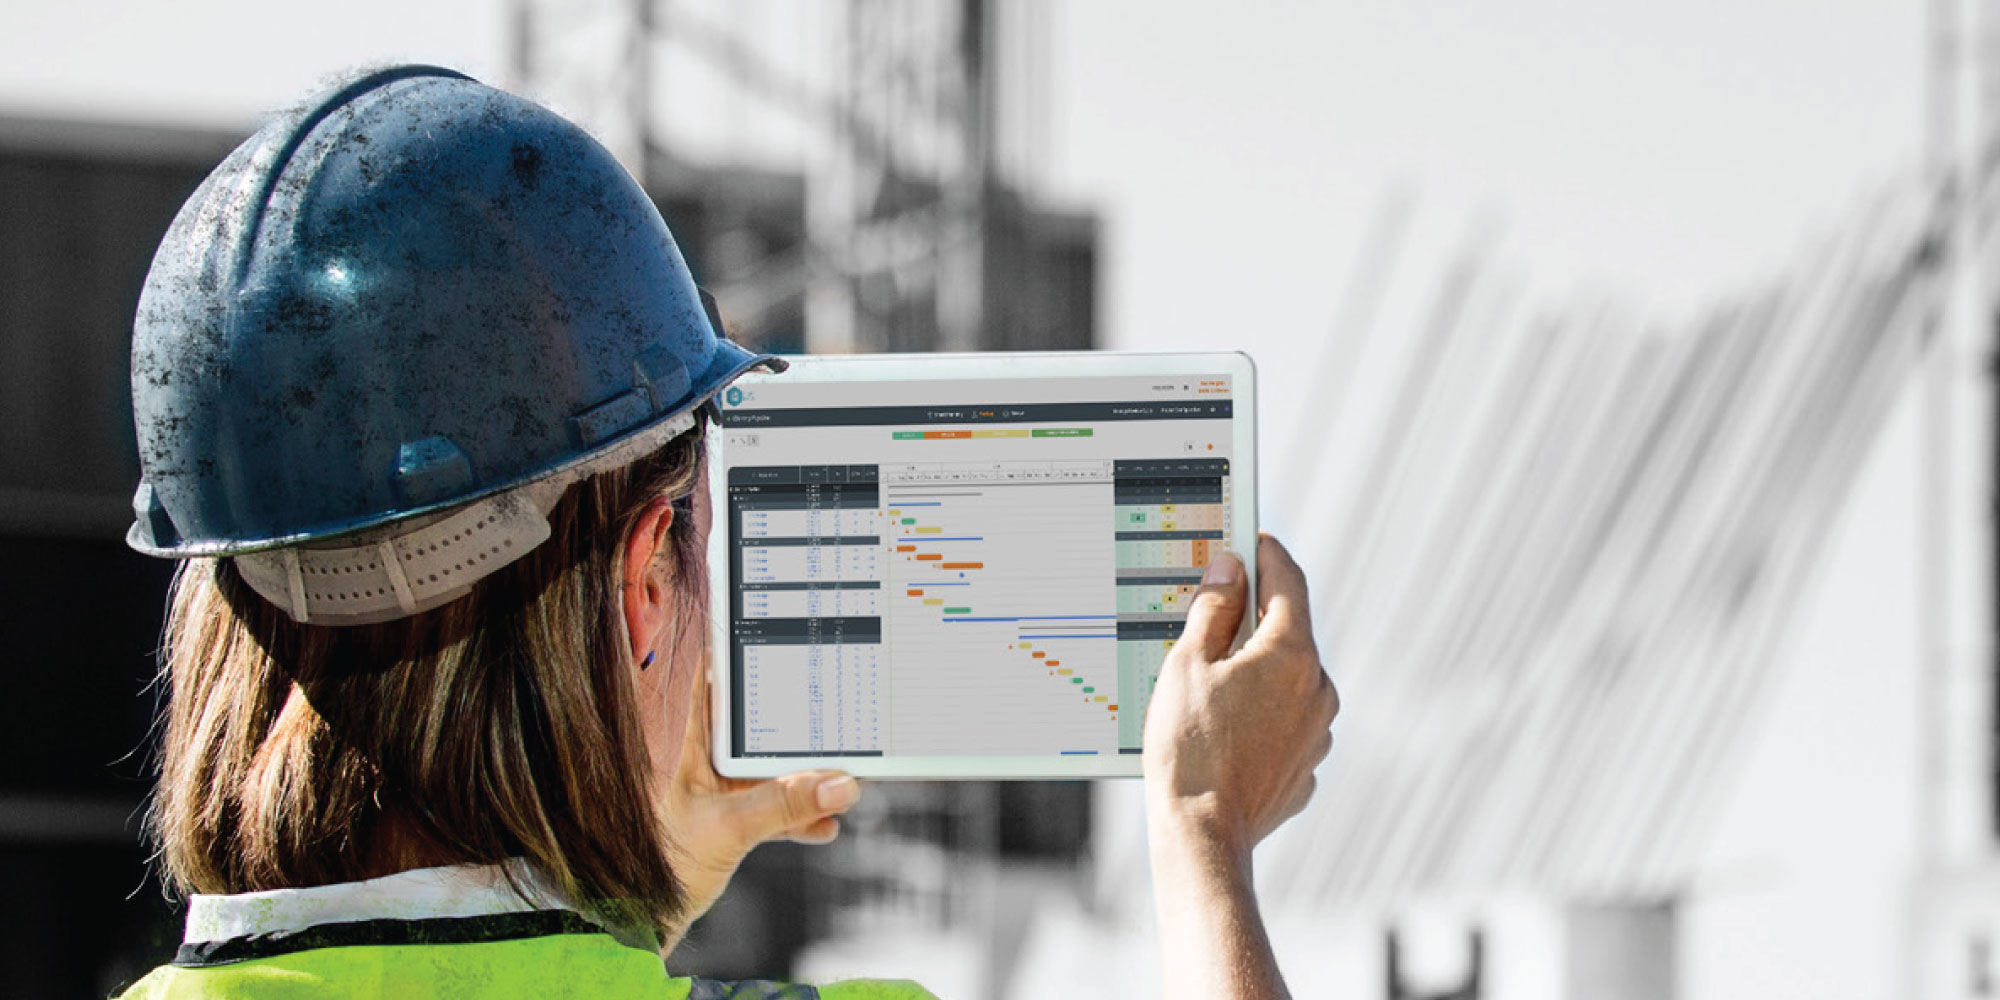 Buyer's Guide to Evaluating and Selecting Construction Project Management Software